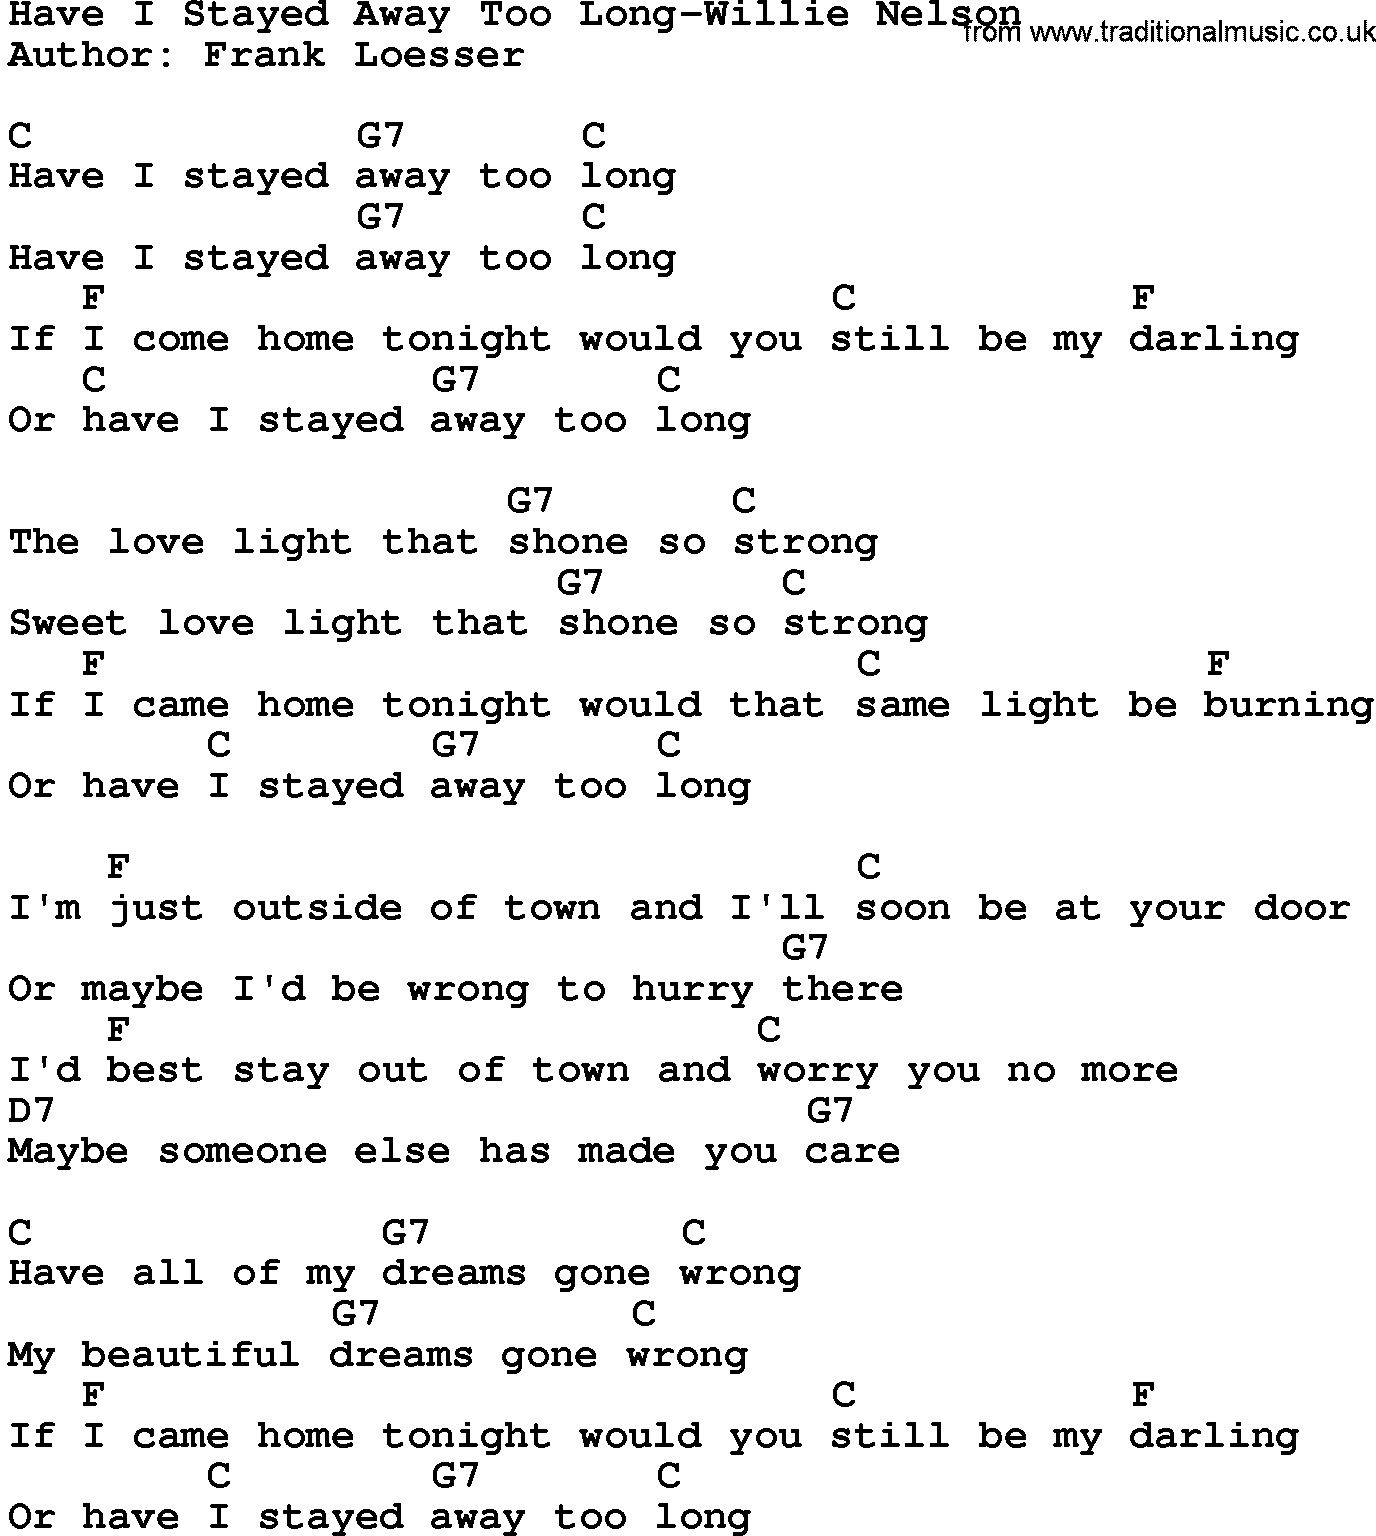 Country music song: Have I Stayed Away Too Long-Willie Nelson lyrics and chords